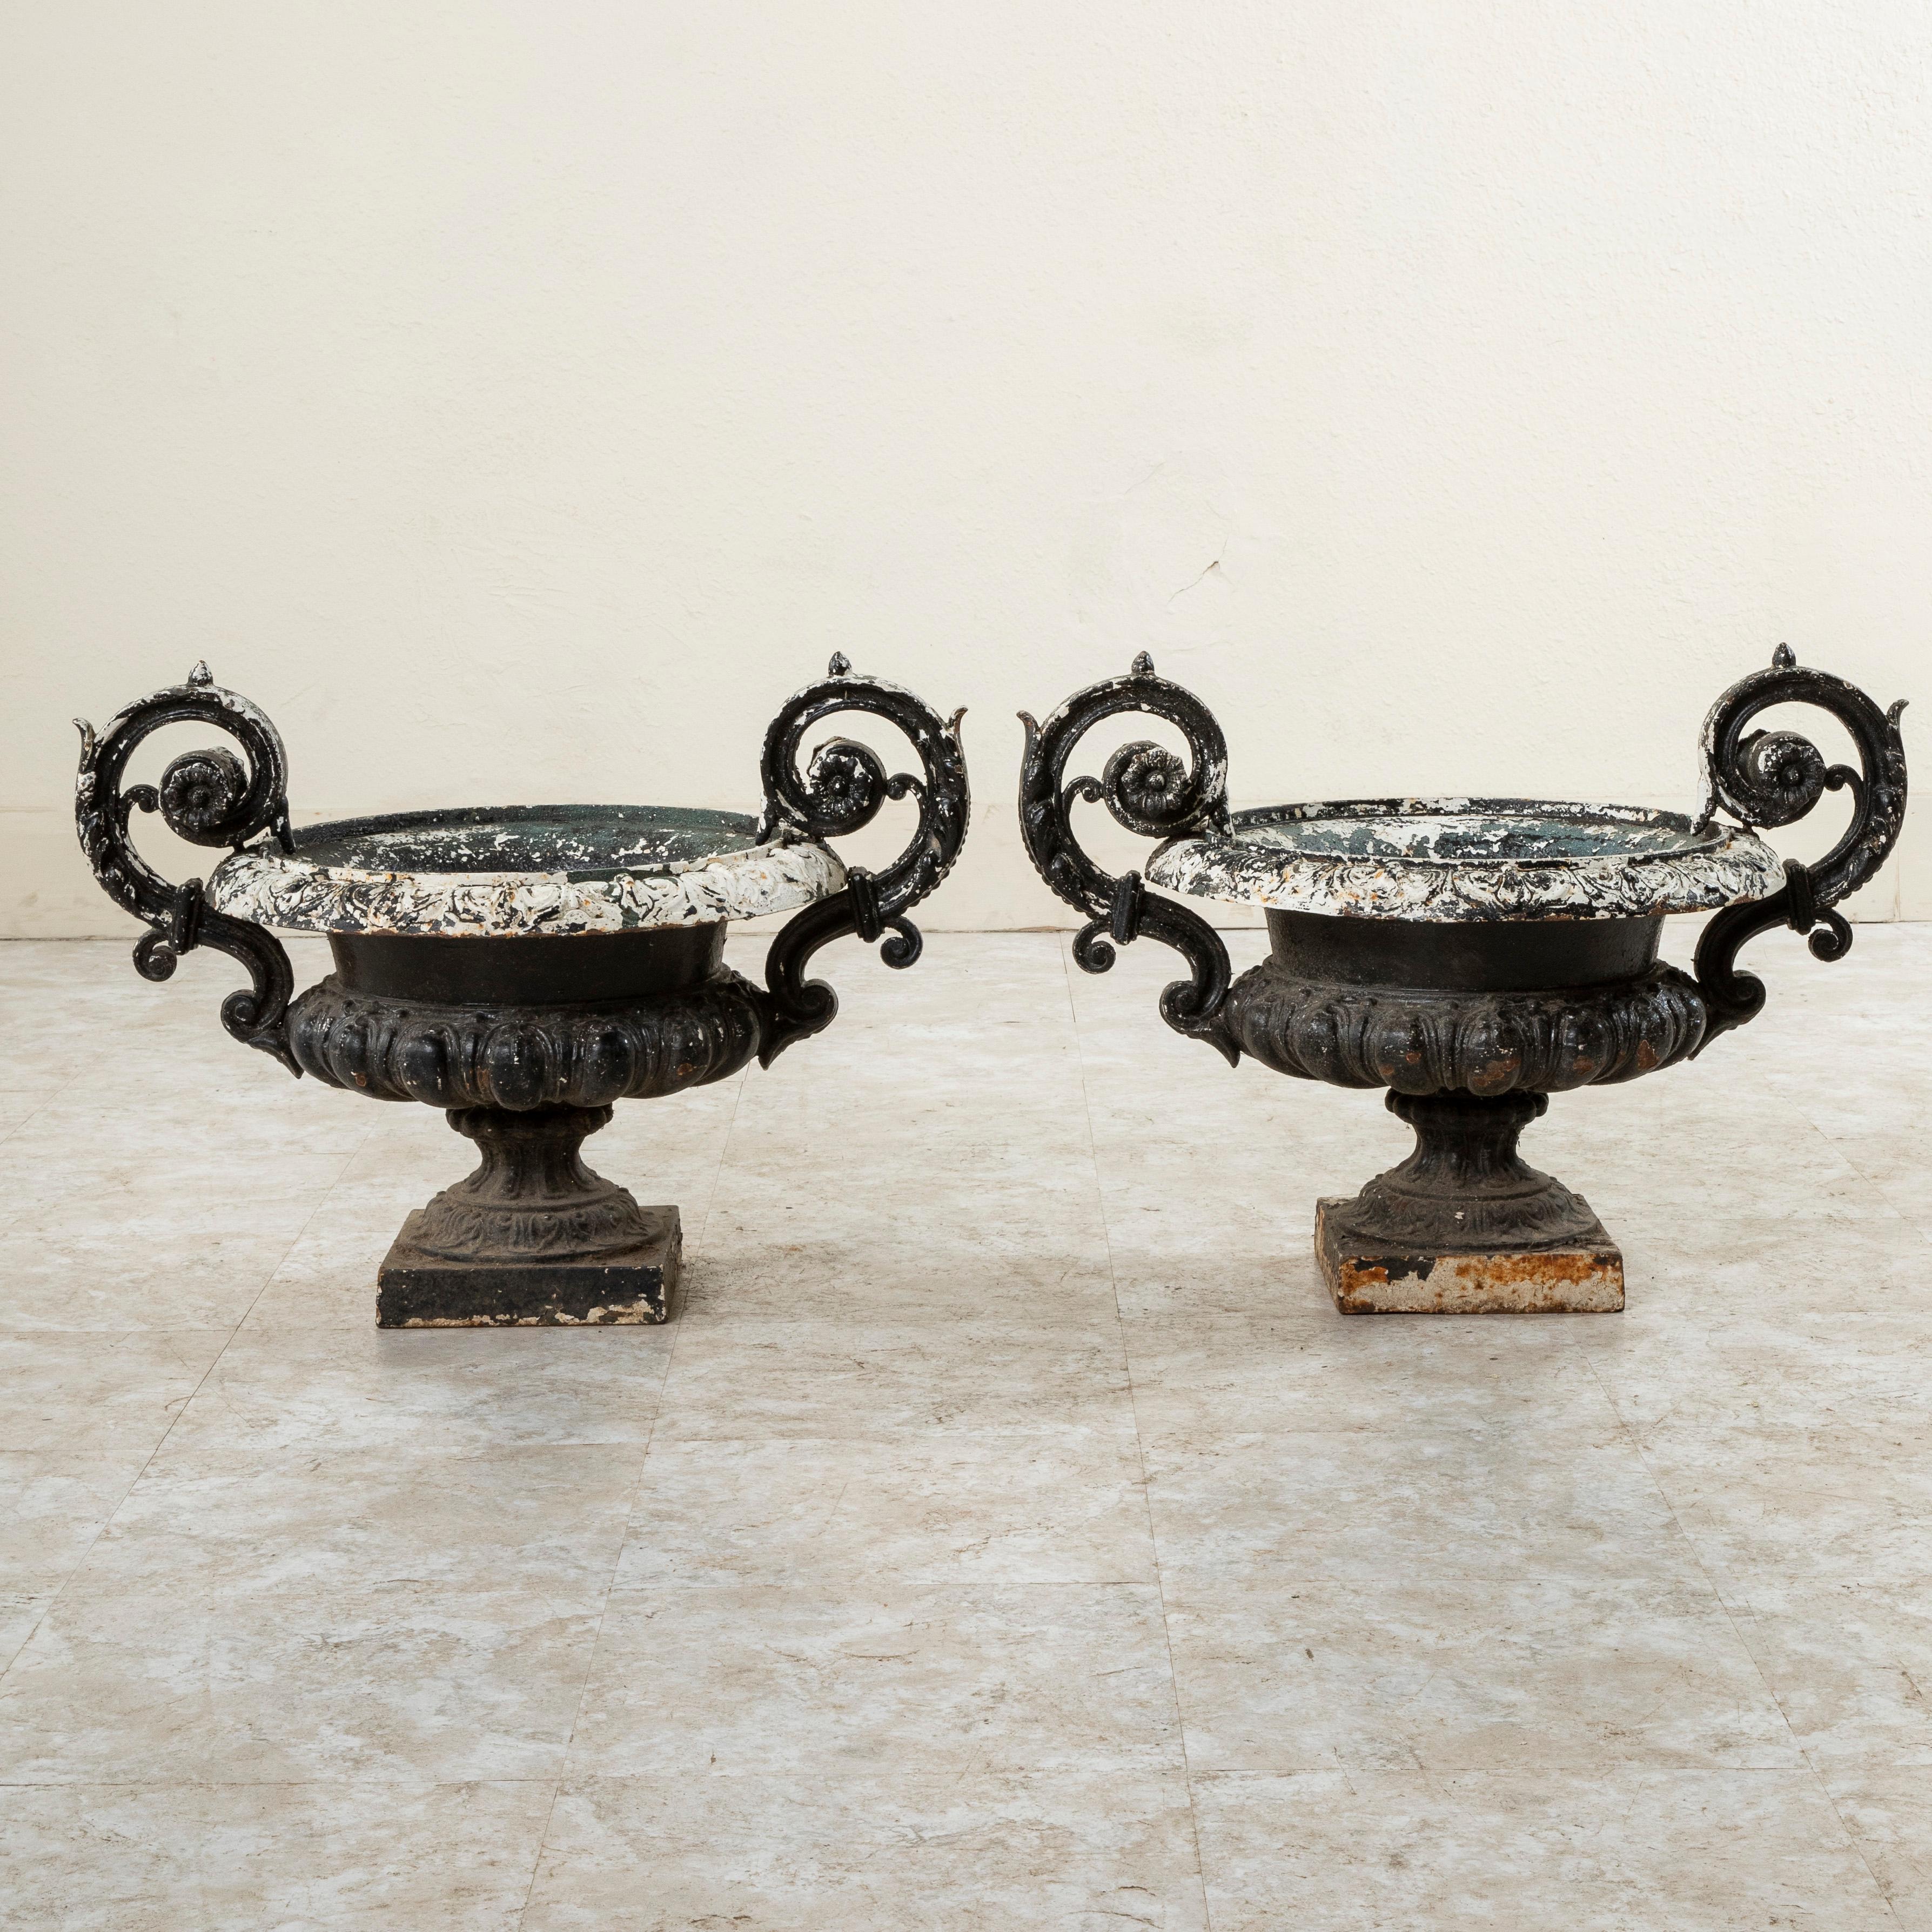 Pair of Large Late 19th Century French Cast Iron Jardinieres, Urns, Planters For Sale 2